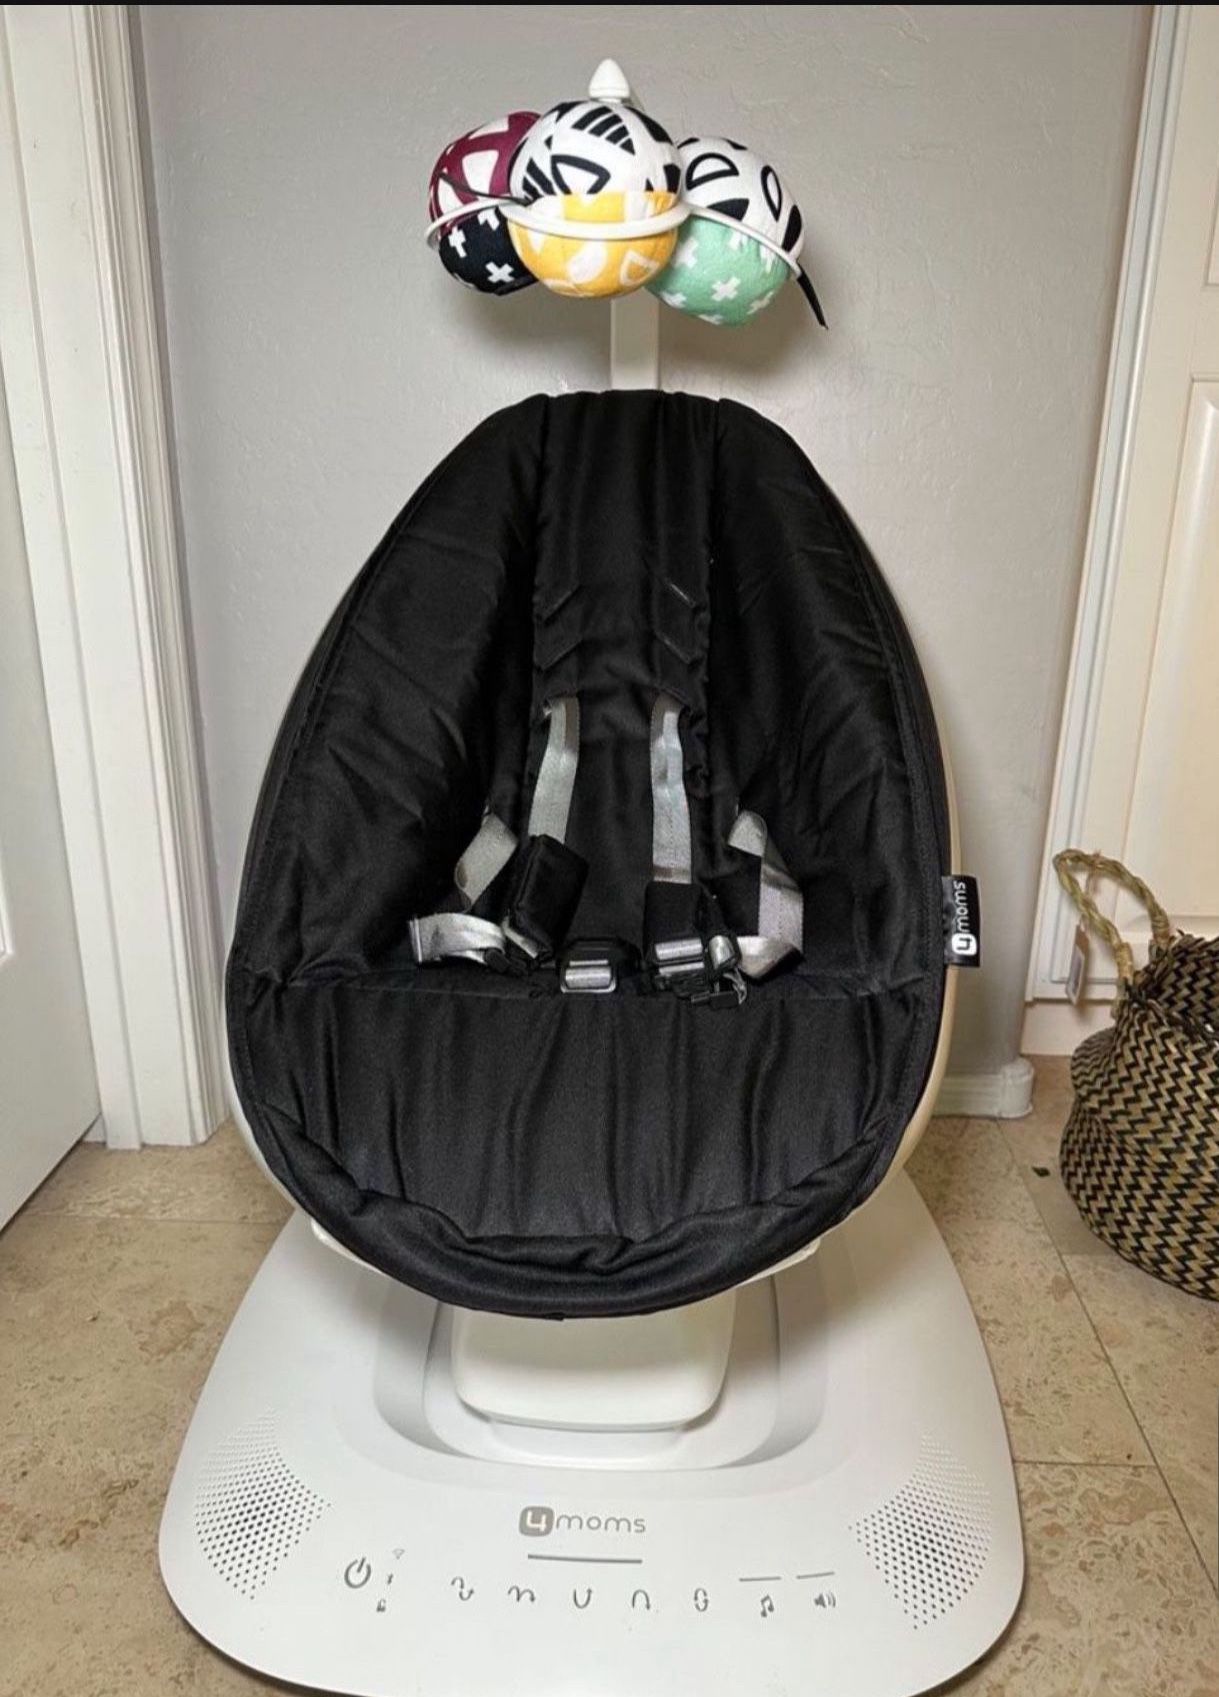 Mamaroo Multi-Motion Baby Swing: Soothe, Comfort, and Delight!4moms MamaRoo Multi-Motion Baby Swing, Bluetooth Enabled with 5 Unique Motions, Black 